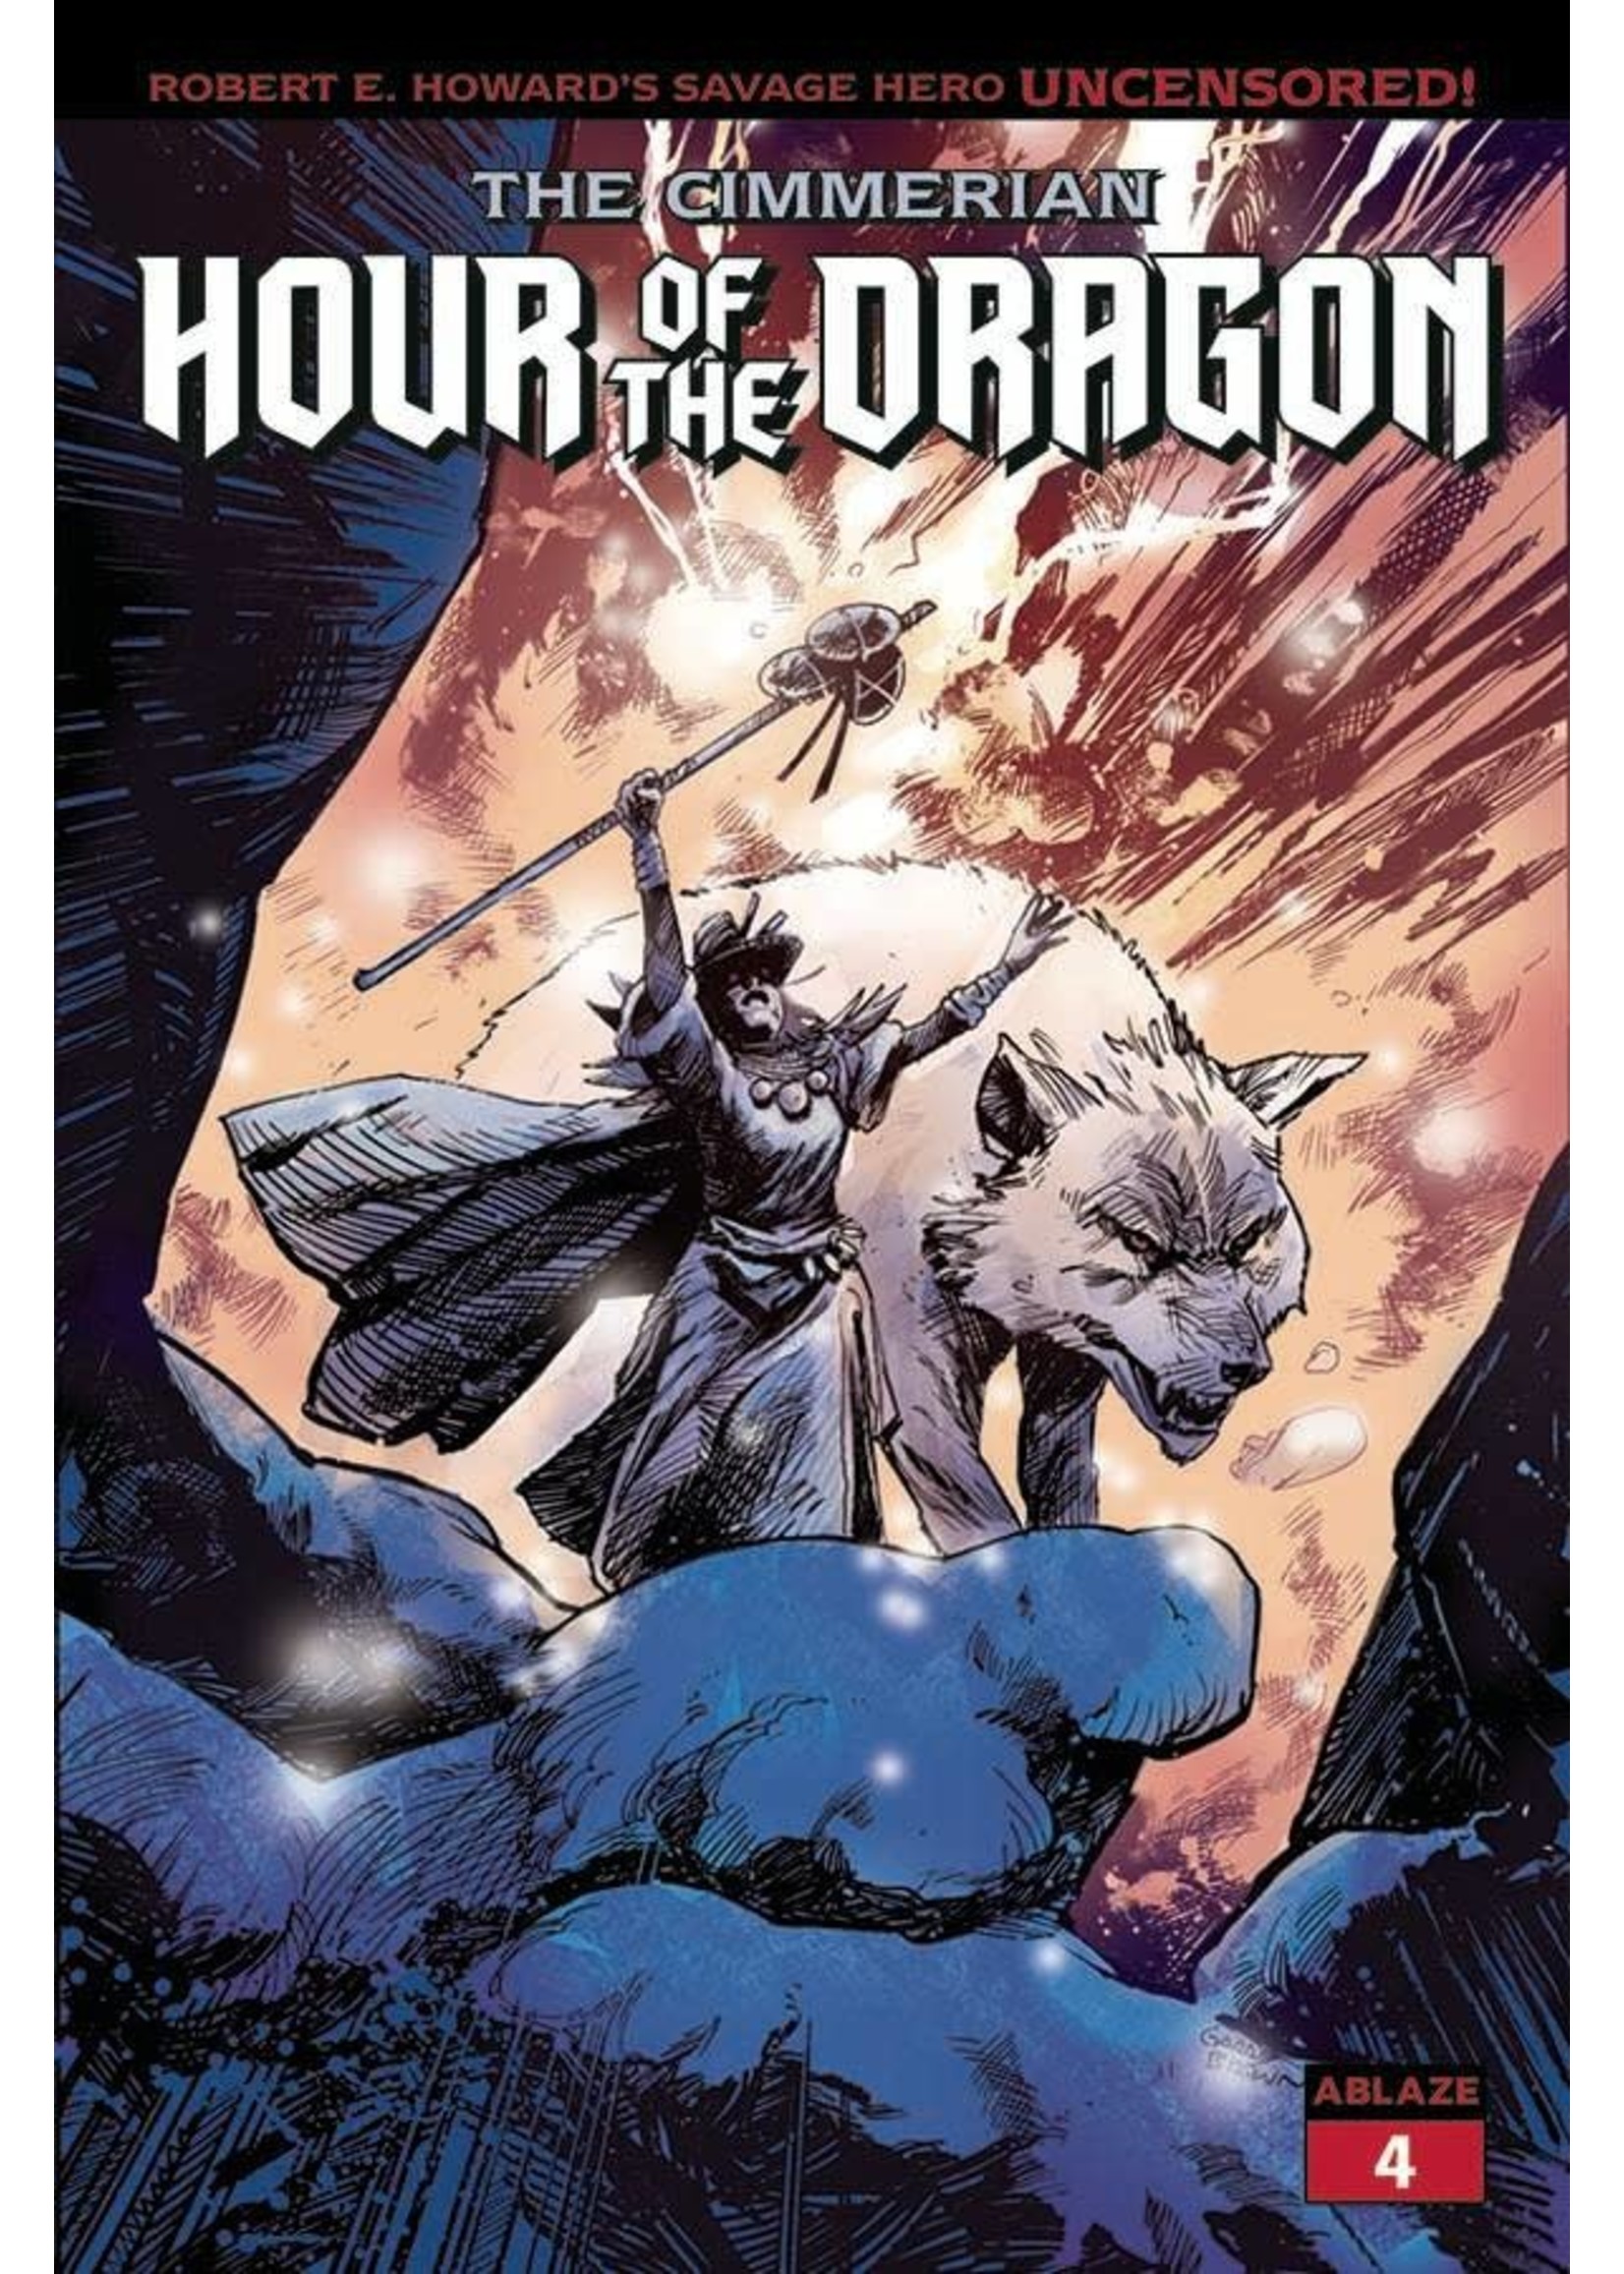 The Cimmerian: Hour of the Dragon #4 (MR)